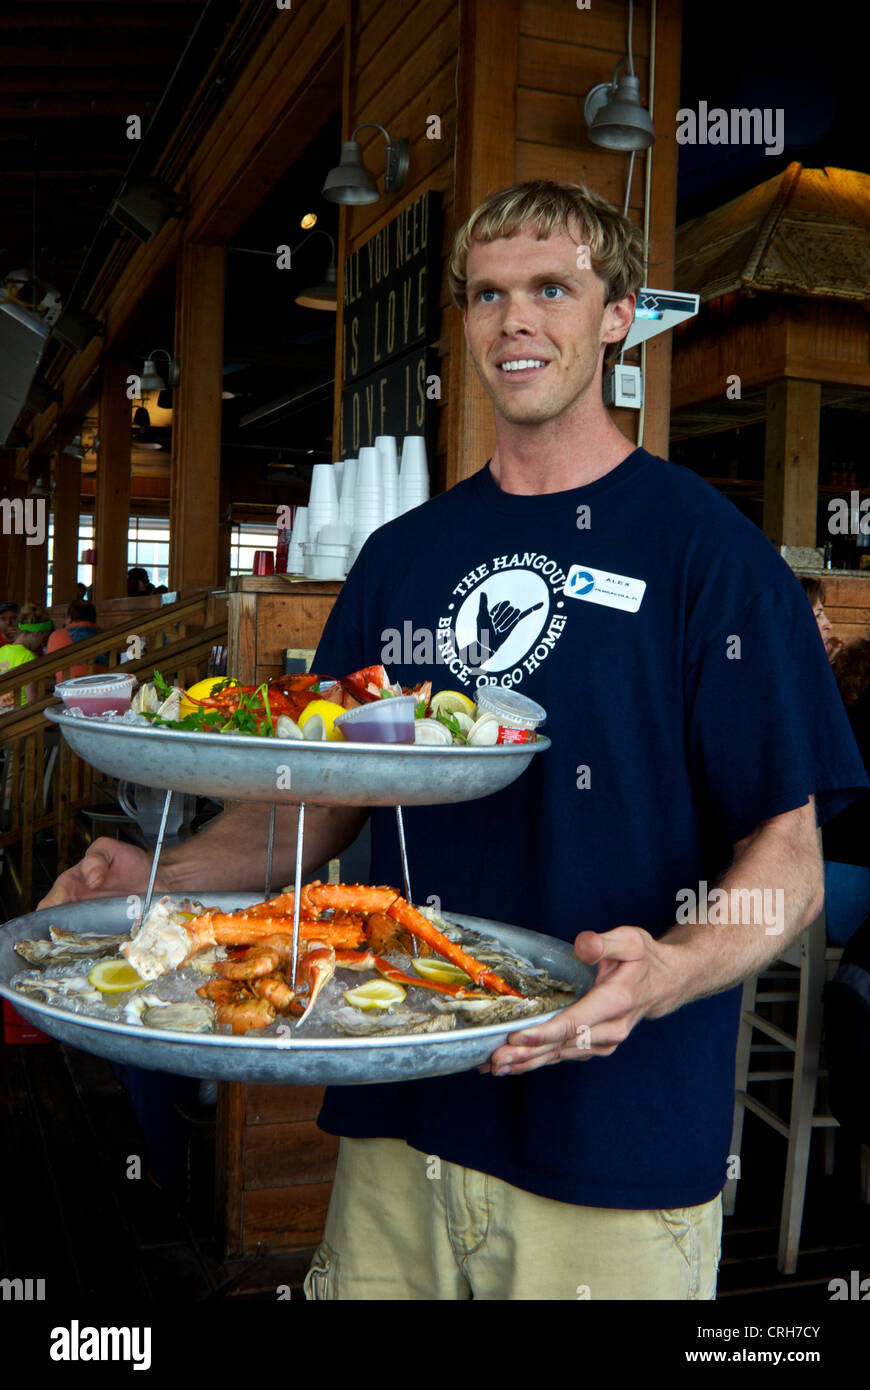 The Hangout Restaurant waiter two tier serving tray assorted cooked raw shellfish appetizers on ice Stock Photo